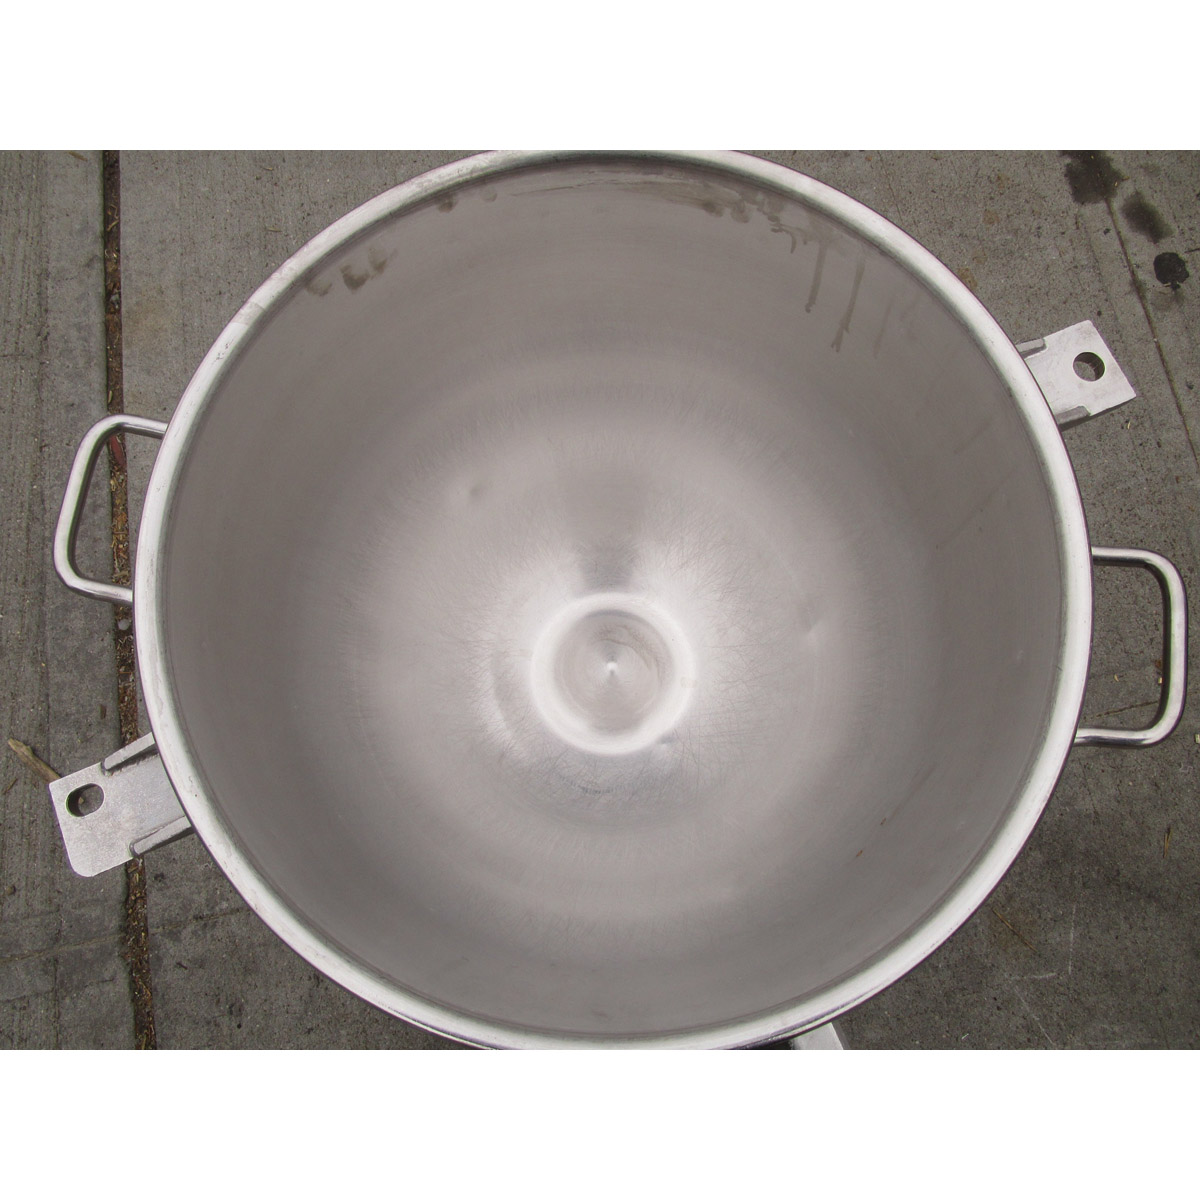 Hobart Legacy BOWL-HL80 / 00-875846 80 Qt. Stainless Steel Bowl For HL800, Very Good Condition image 1